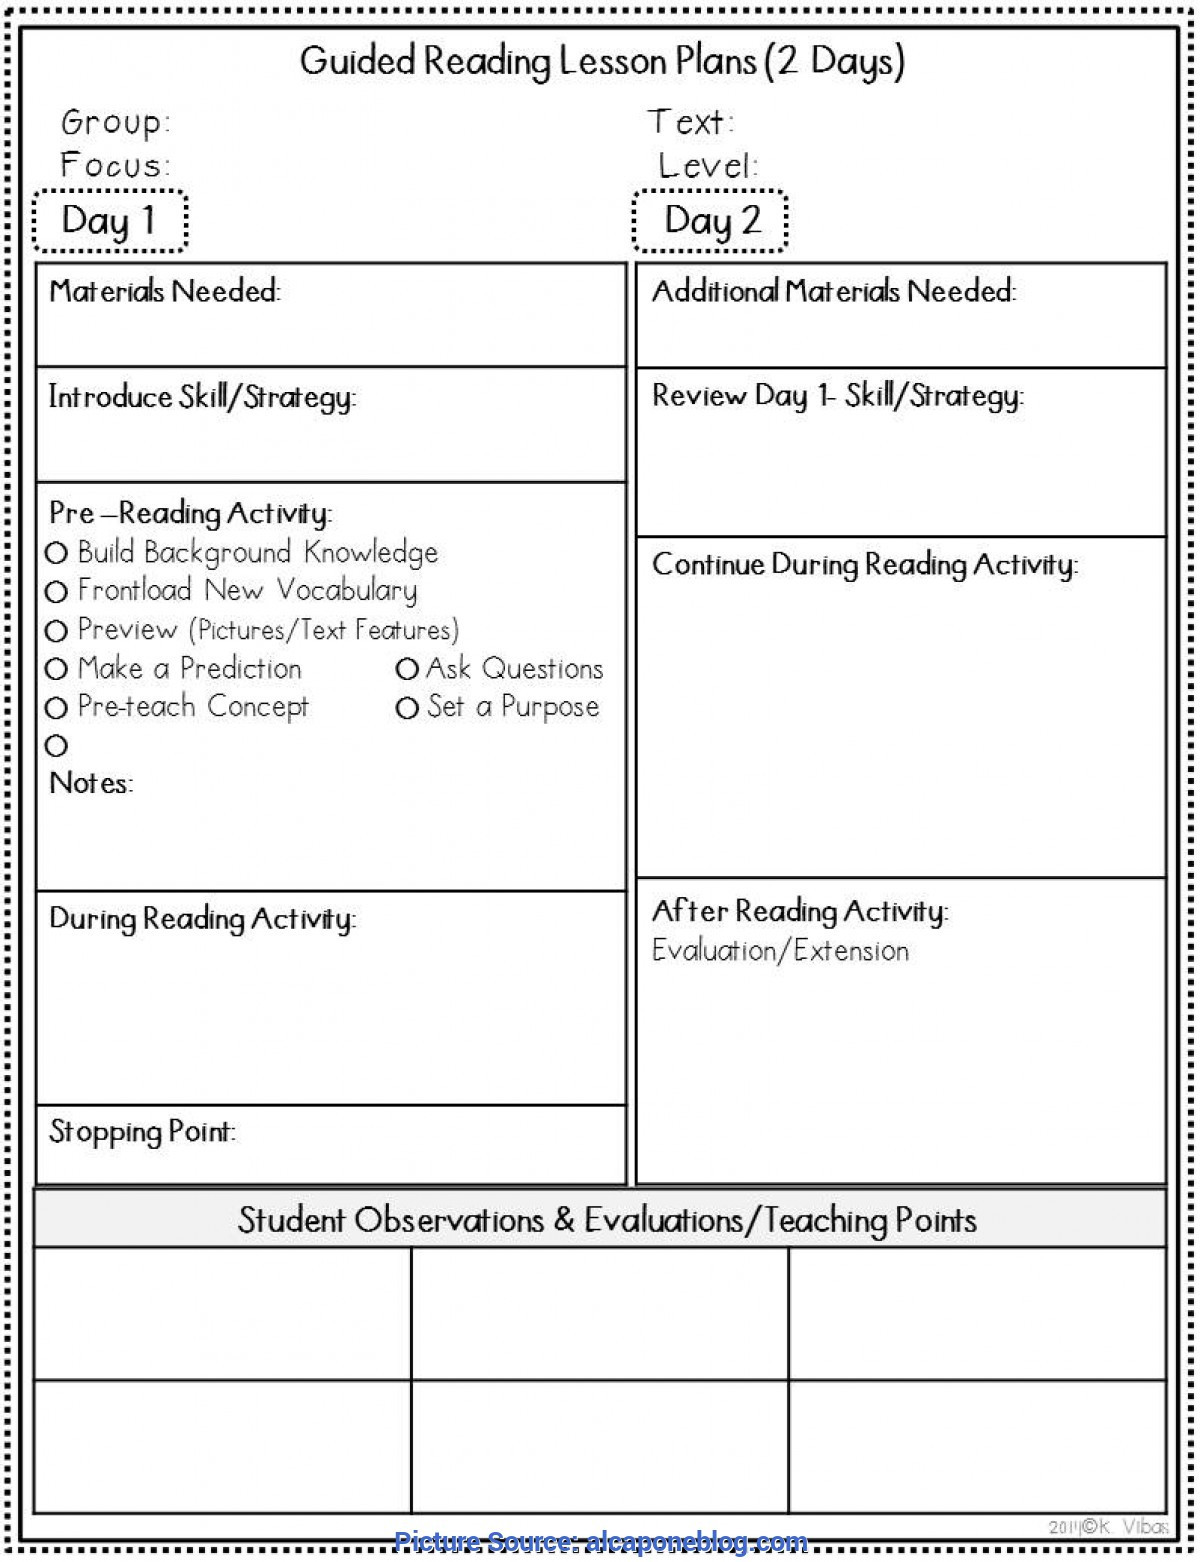 Guided Reading Lesson Plans Good Change Management Lessons Learned Template Lesson